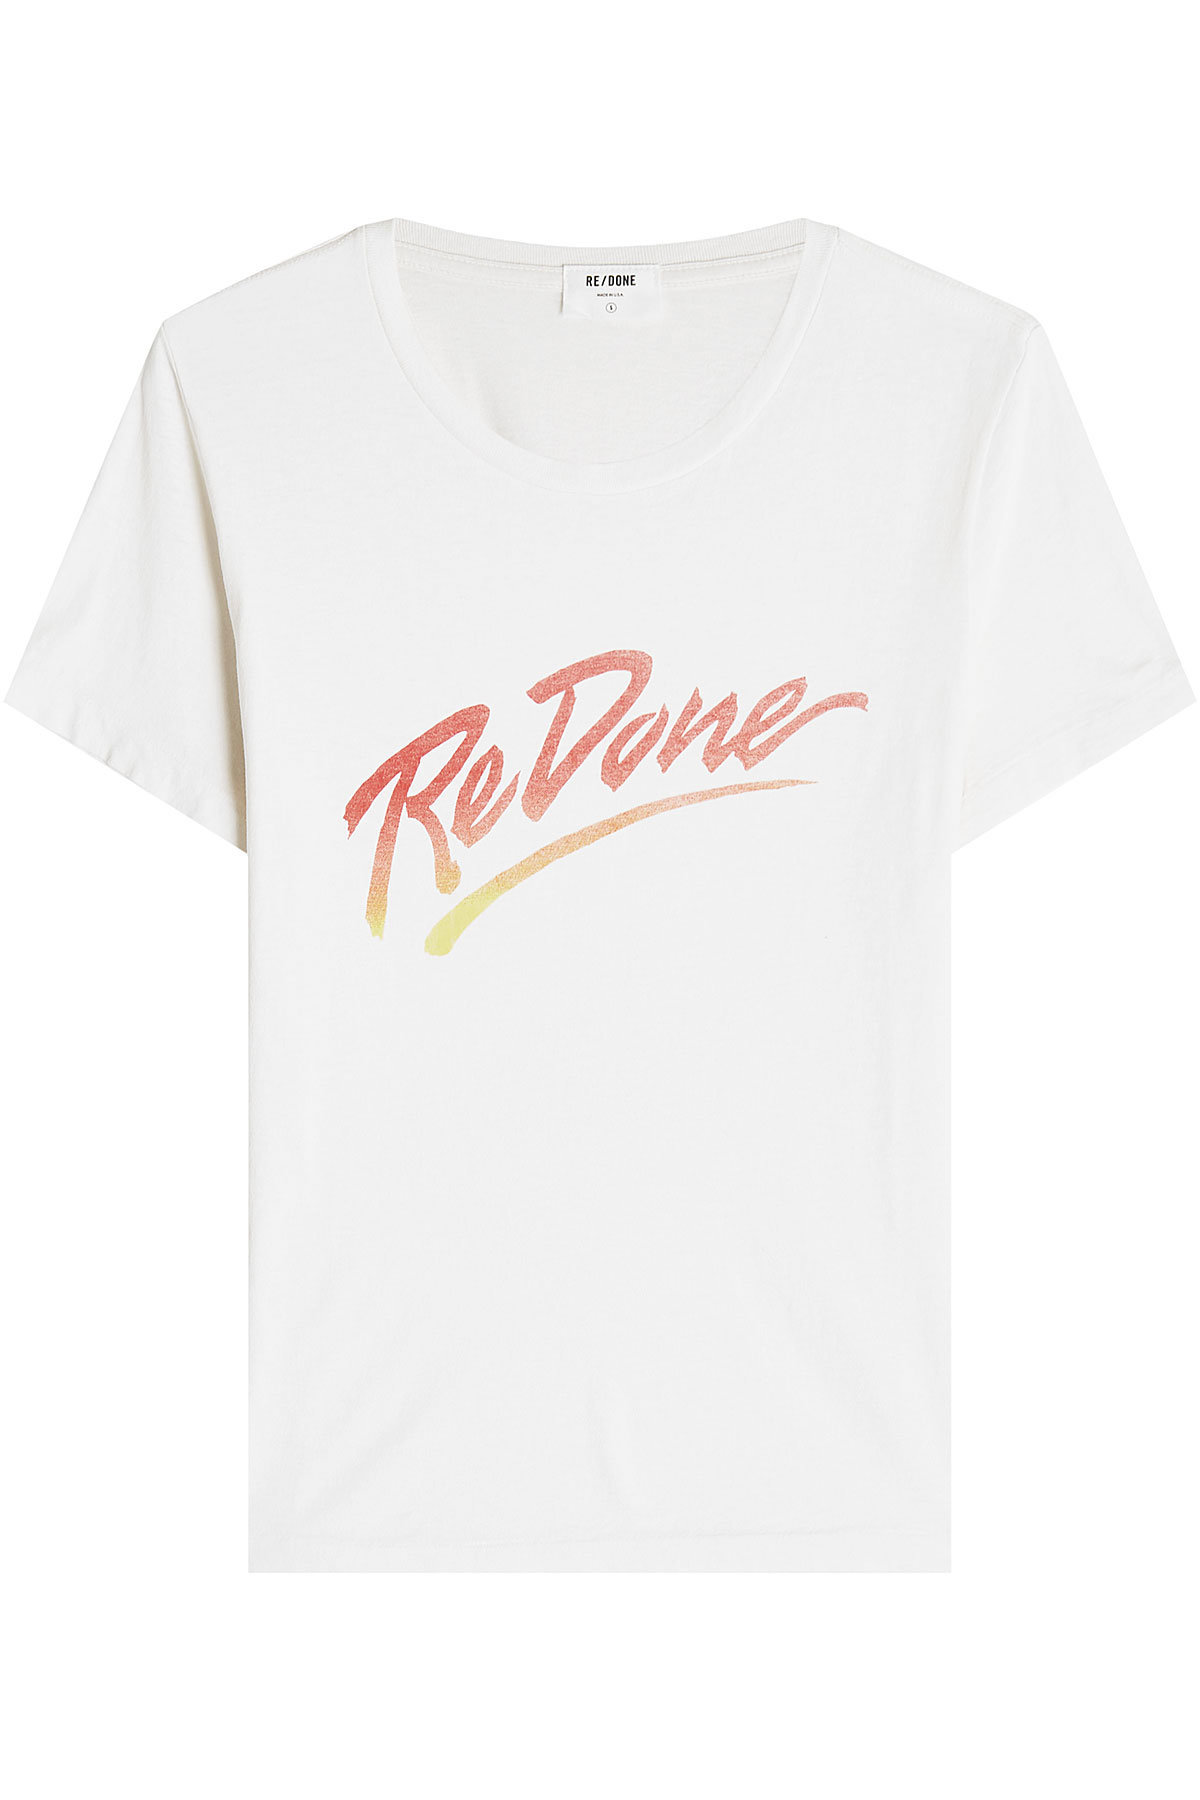 The Classic Tee Printed Cotton T-Shirt by RE/DONE